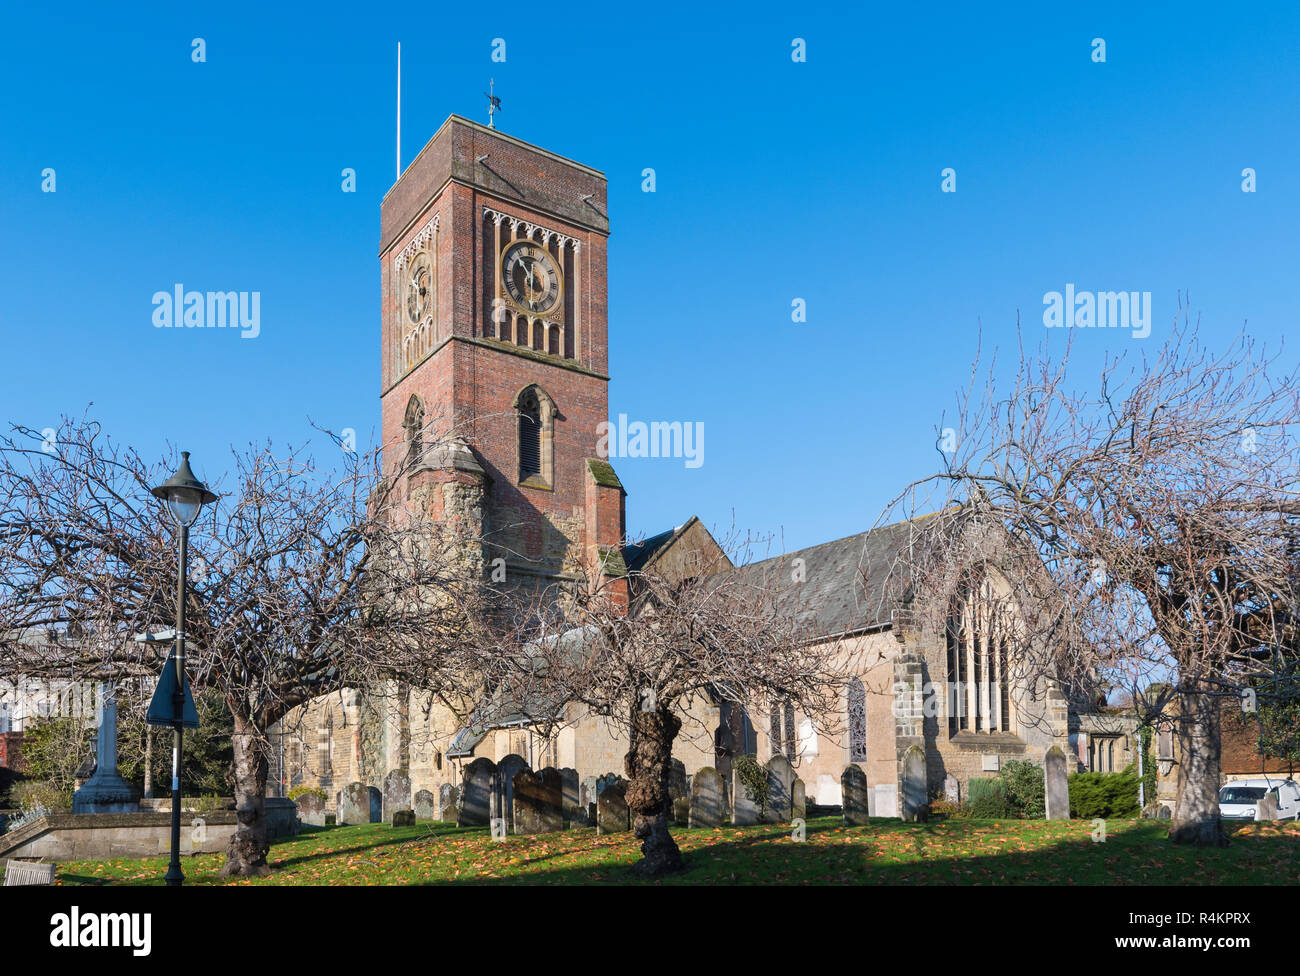 Parish Church of St Mary The Virgin (St Mary's Church) without a spire in Petworth, West Sussex, England, UK. Stock Photo